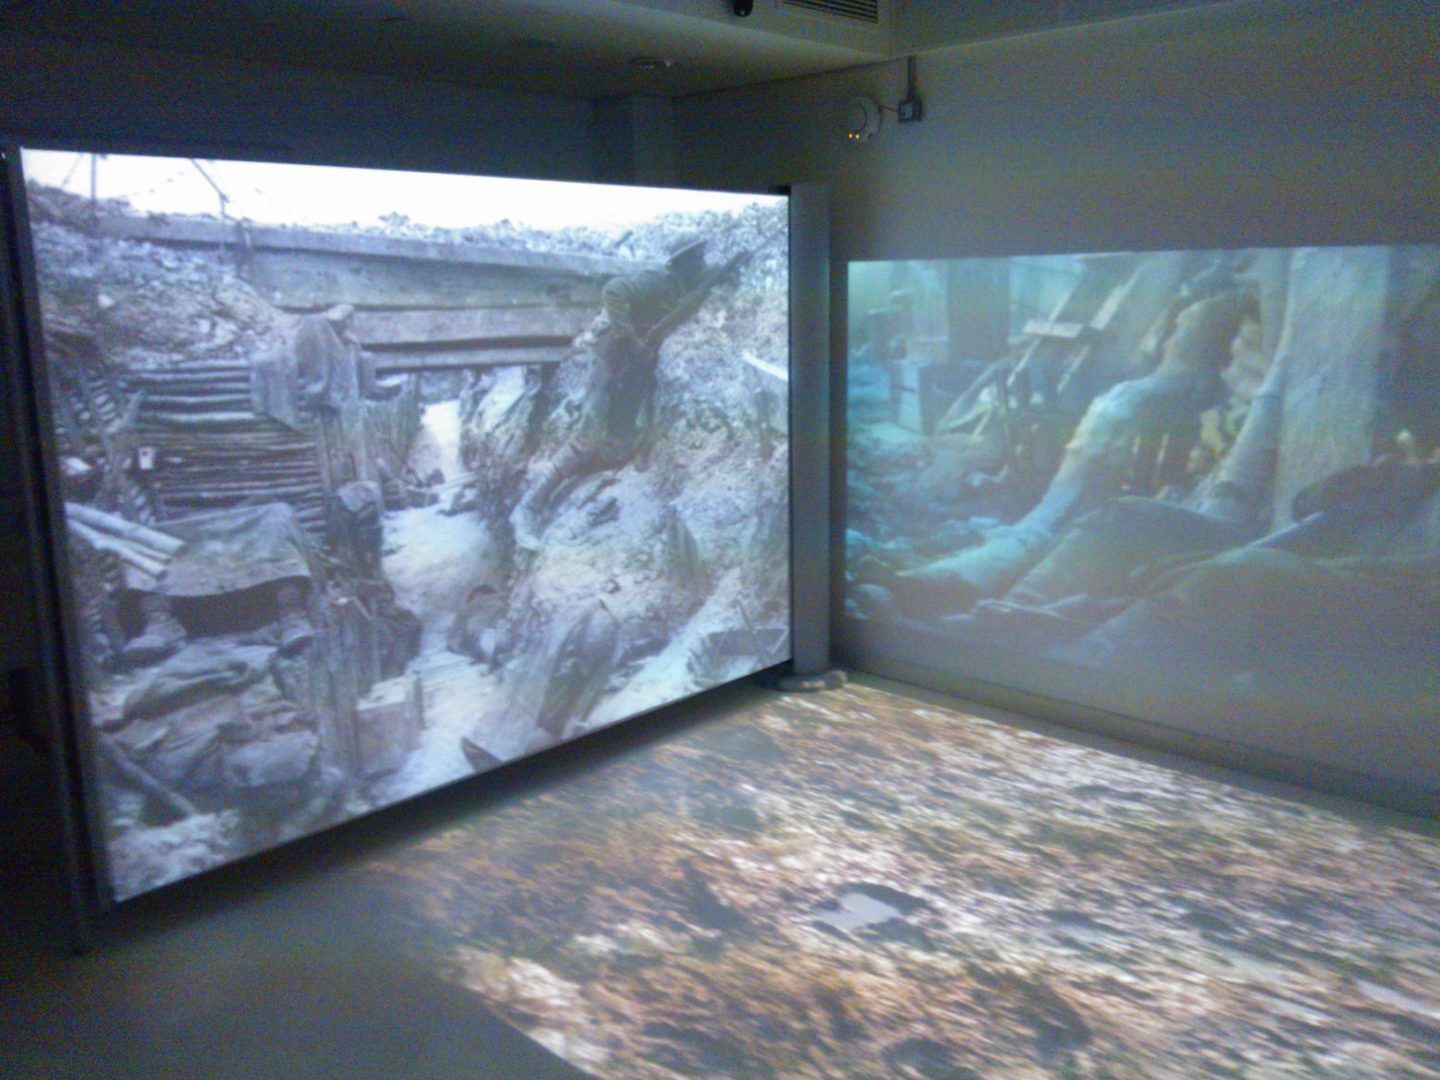 fully interactive immersive room including 2 interactive walls and 1 interactive floor. displaying historical images to enhance learning